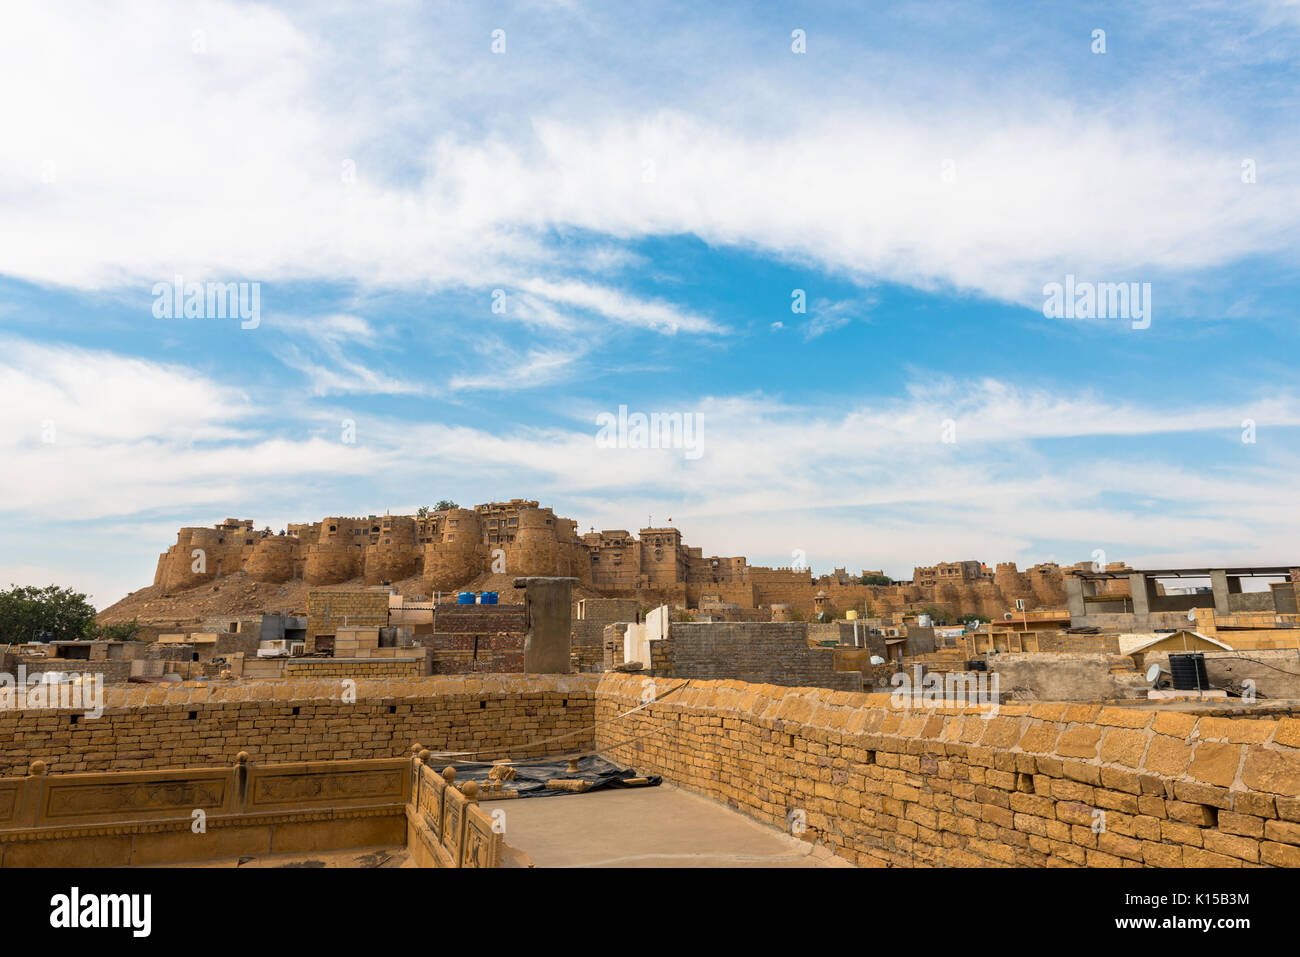 Amazing view from Saalam Singh Ki Haweli, carved yellow sandstone architecture in Jaisalmer, known as Golden City in India. Stock Photo